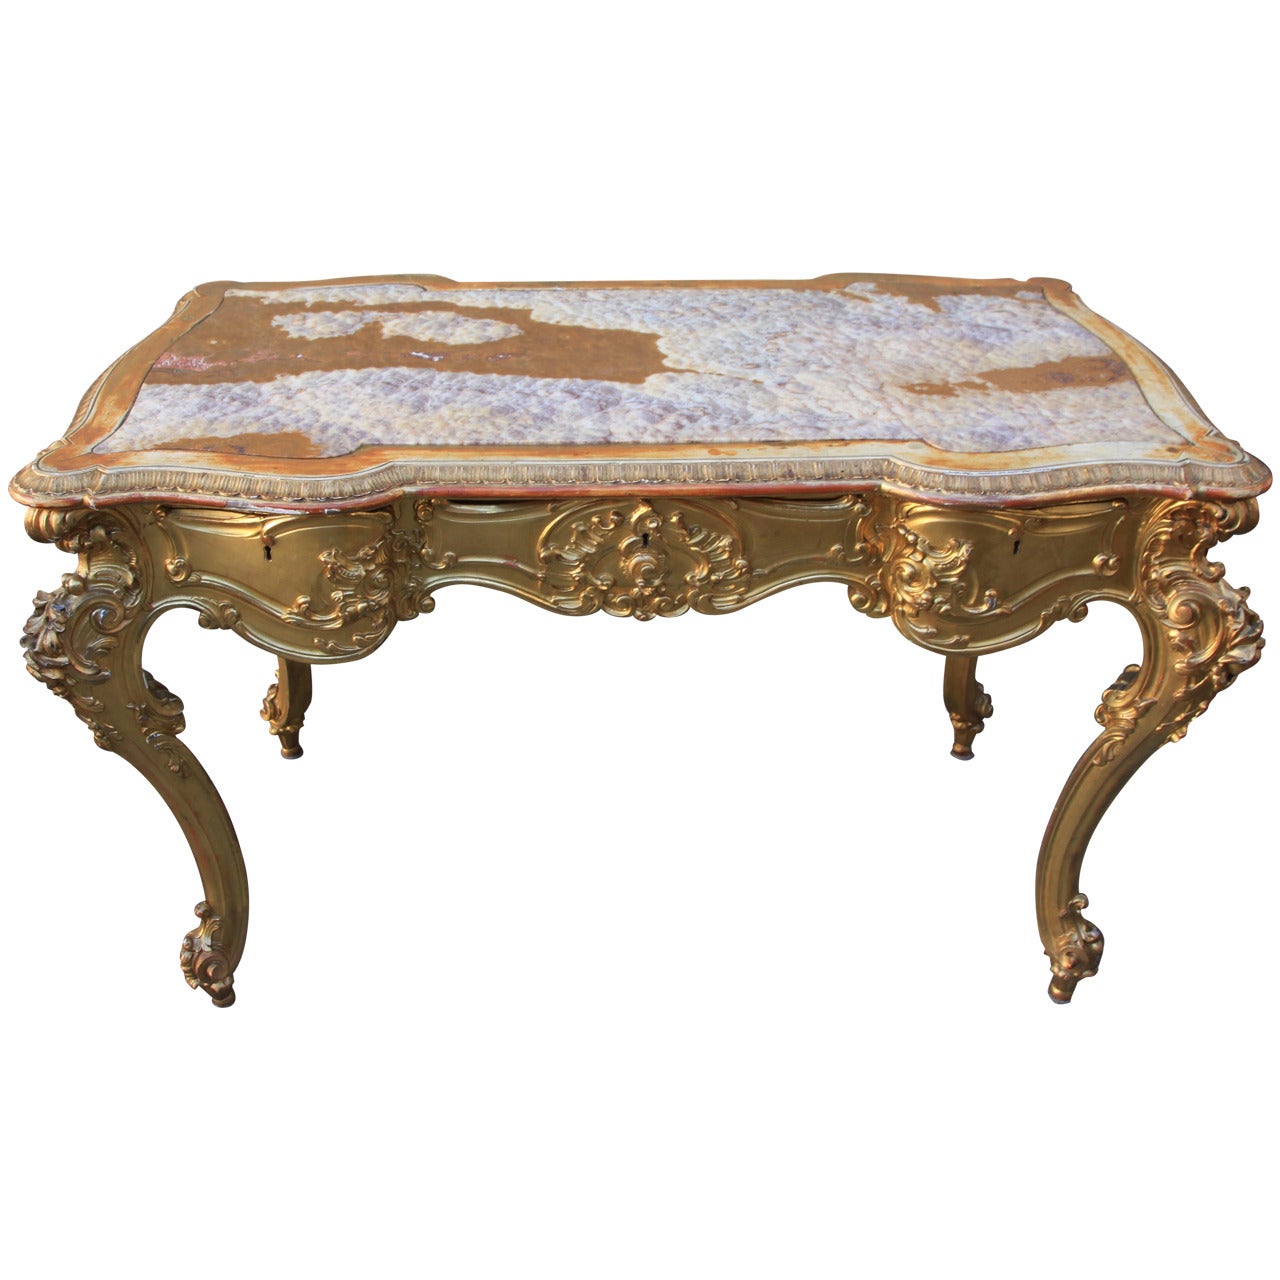 Fine Italian 19th Century Carved and Gilt Writing Table with Onyx Top